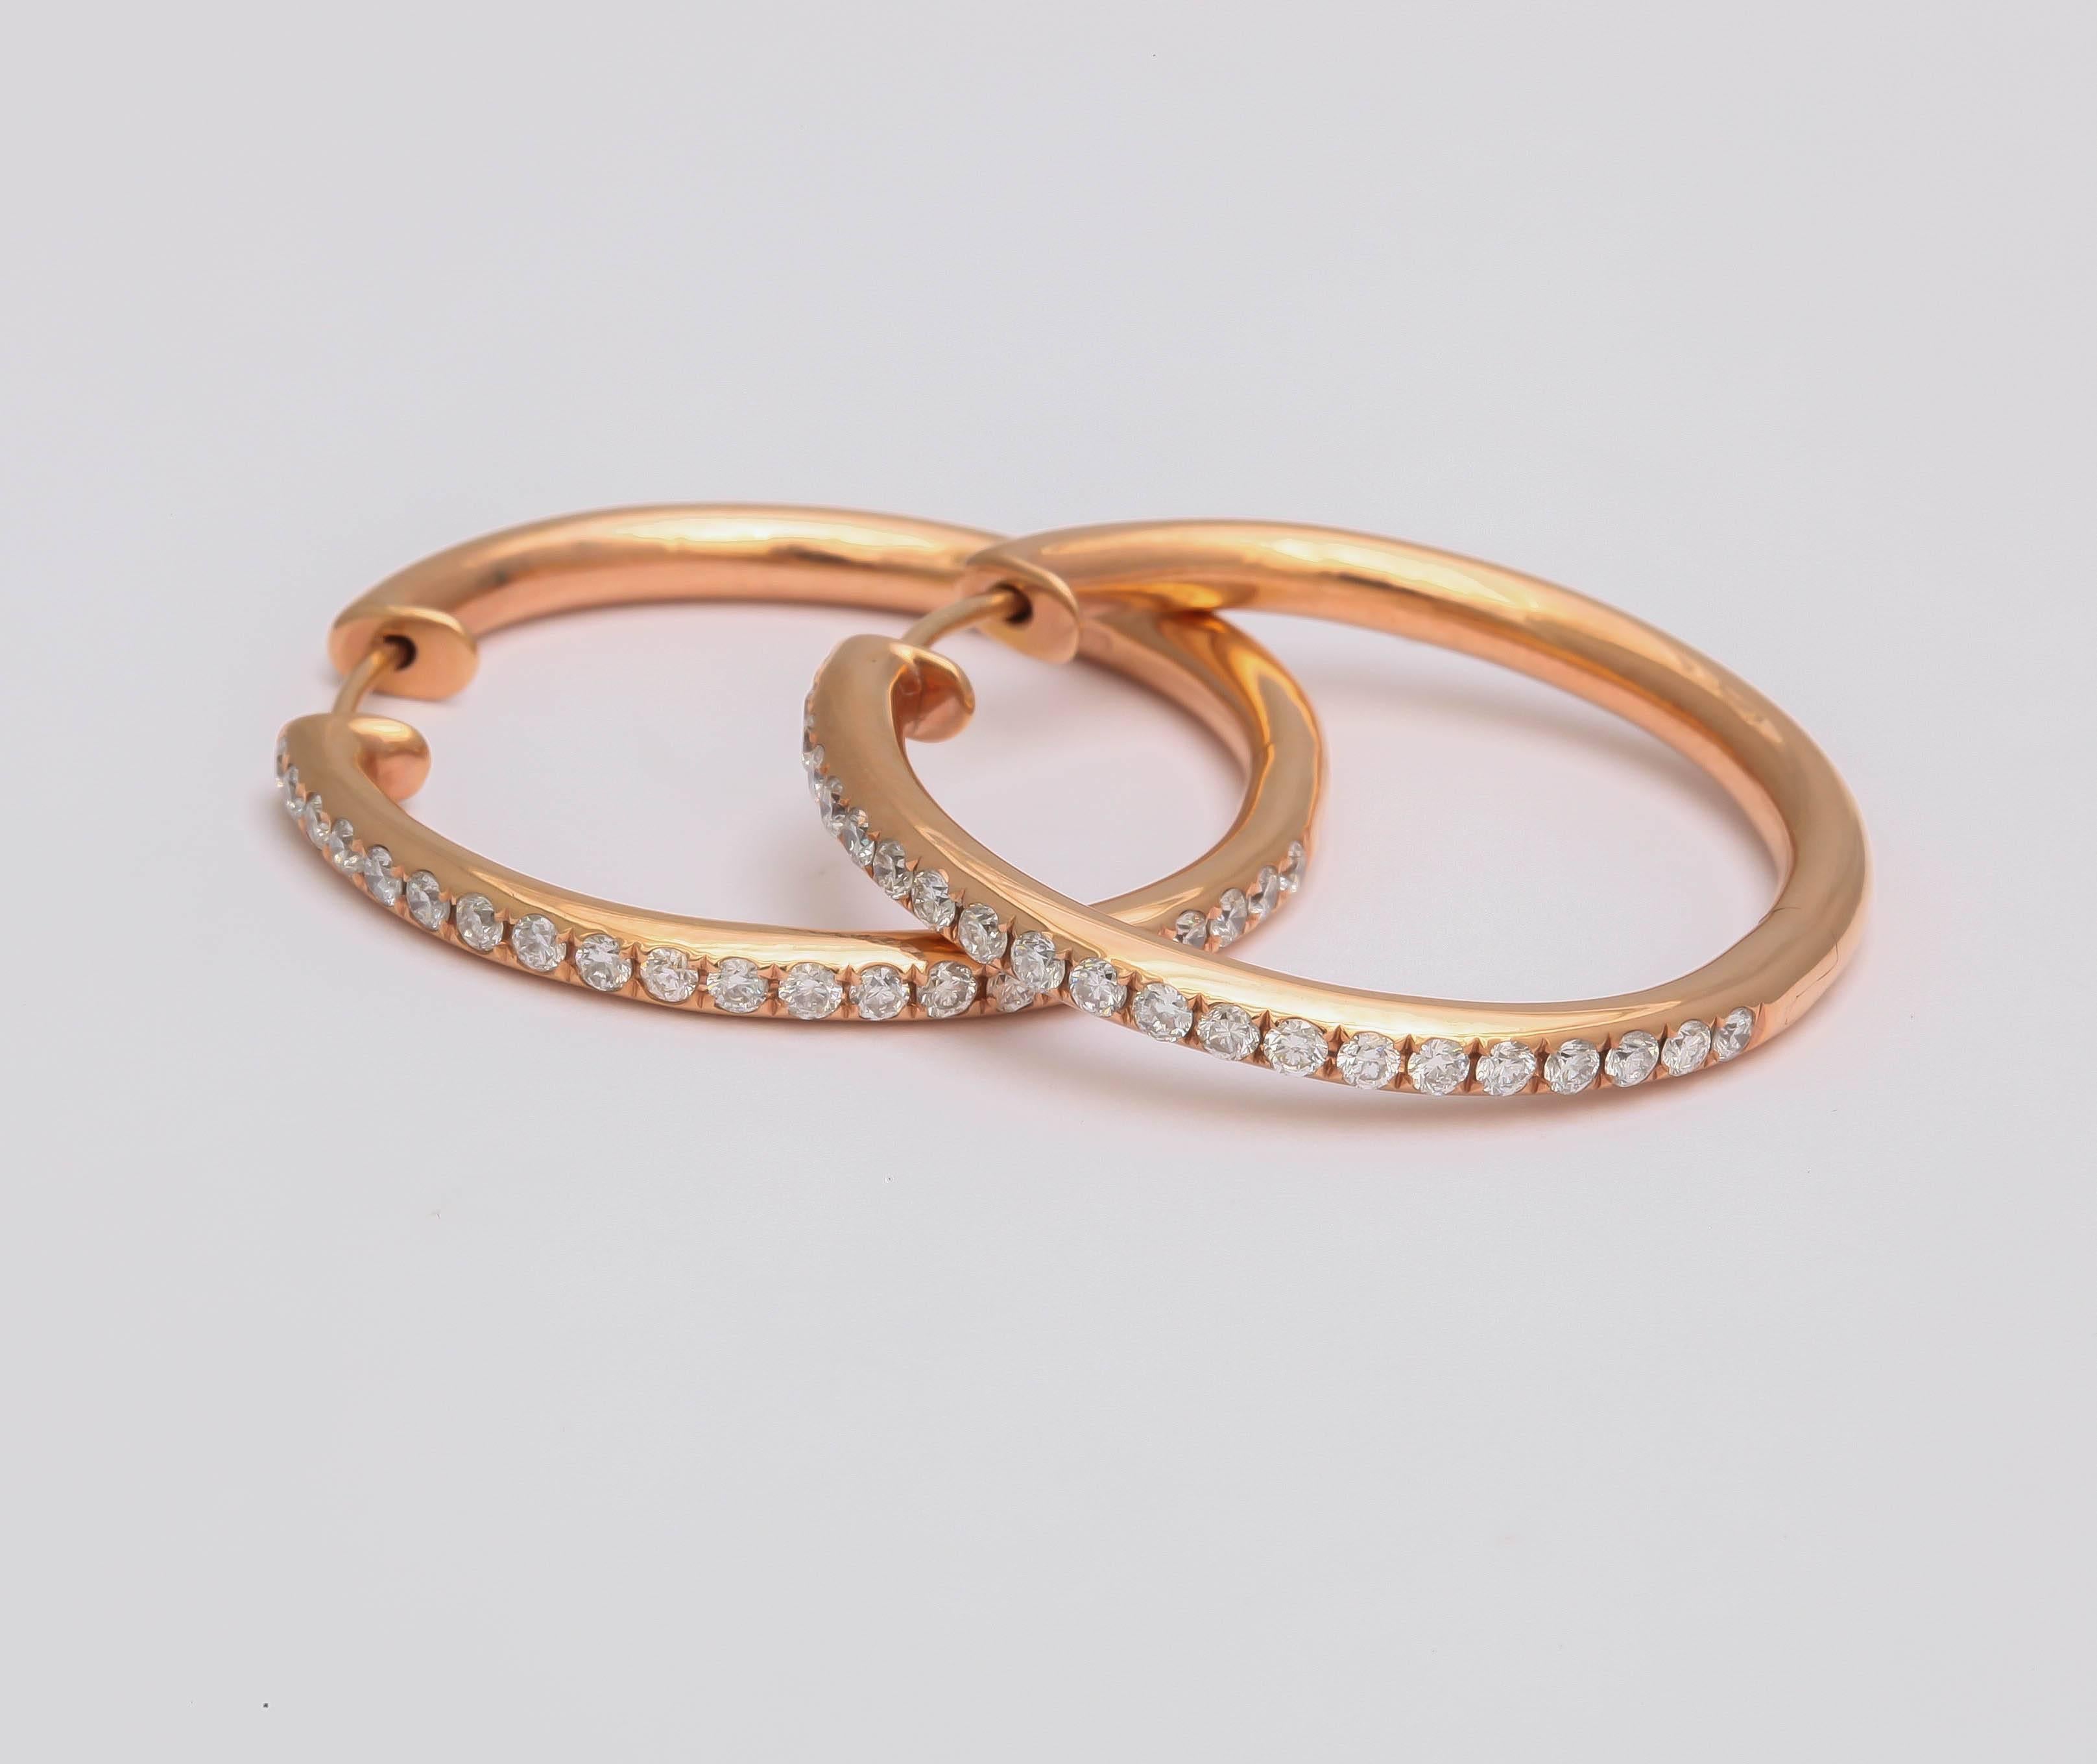 18KT rose gold earrings with white diamonds